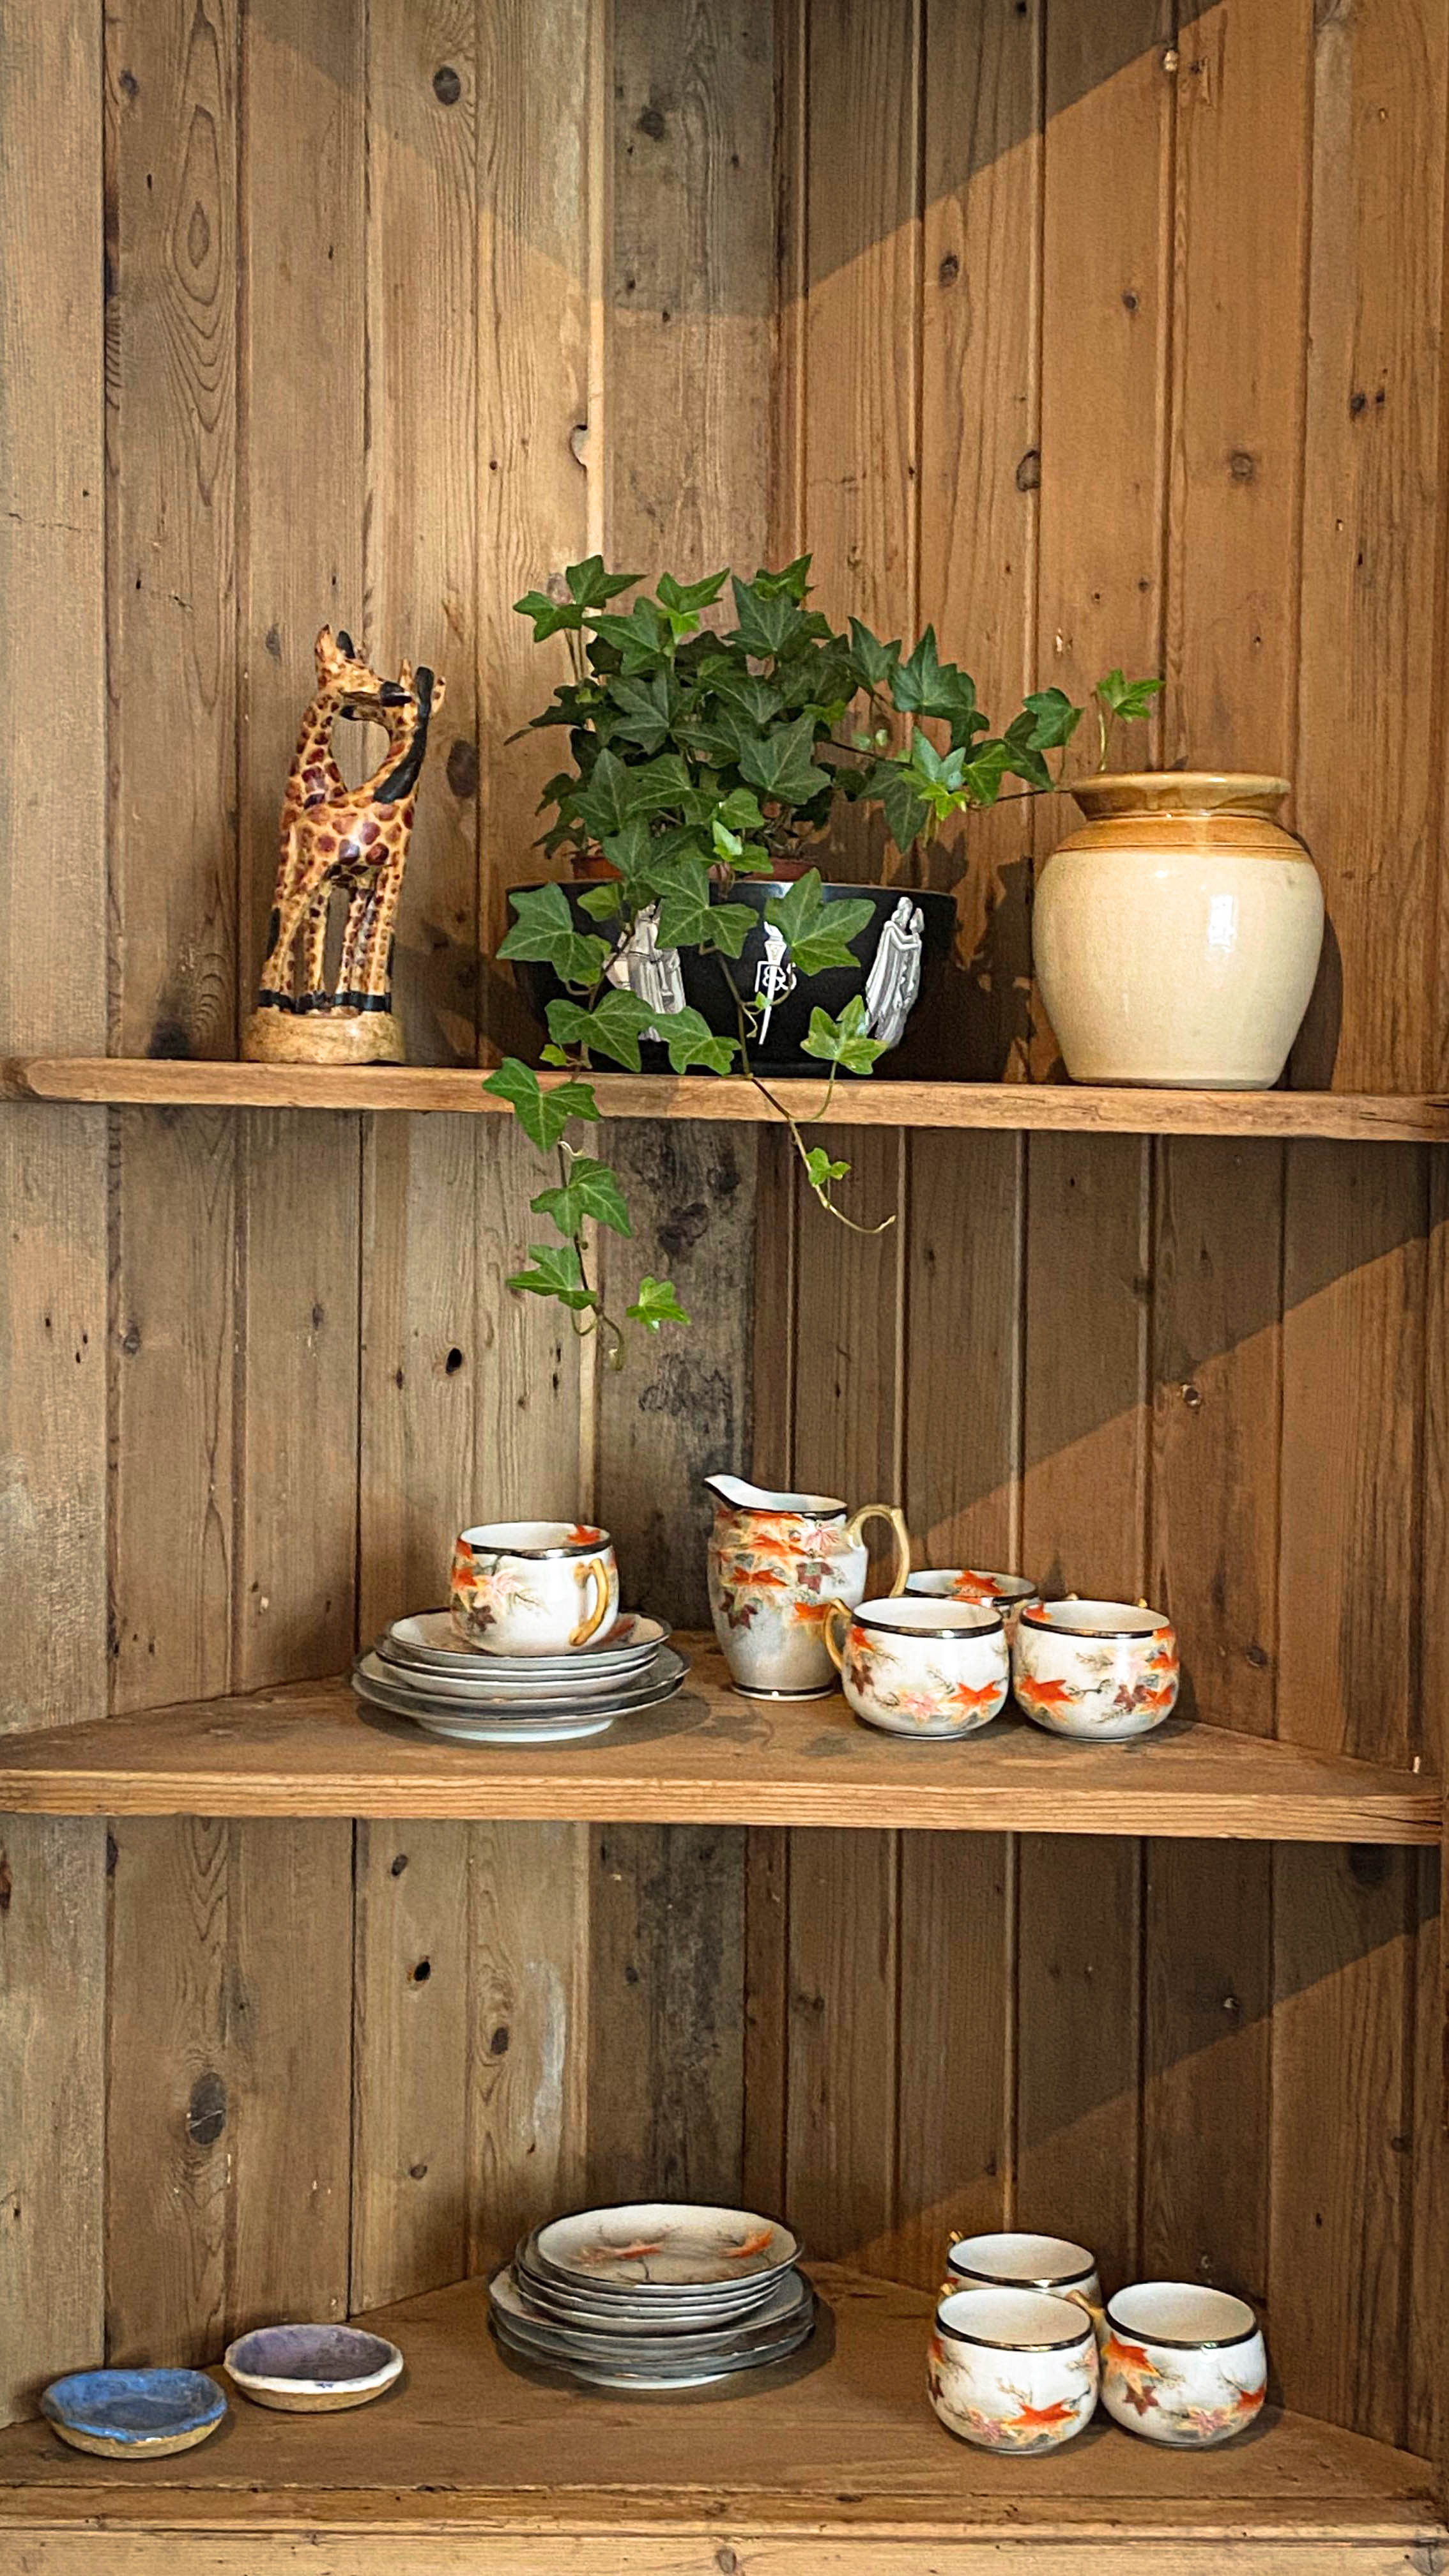 Tea cups and saucers on a corner unit